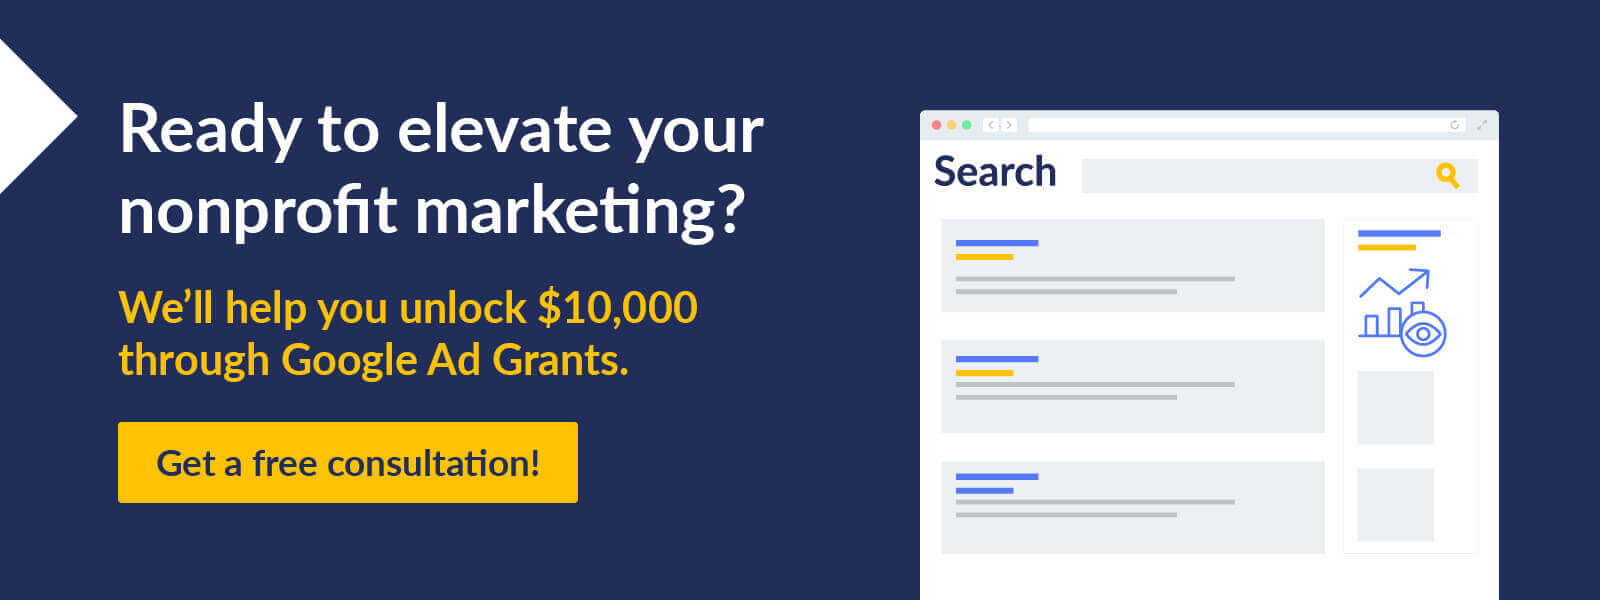 Partner with Getting Attention and start creating powerful ads for your cause.